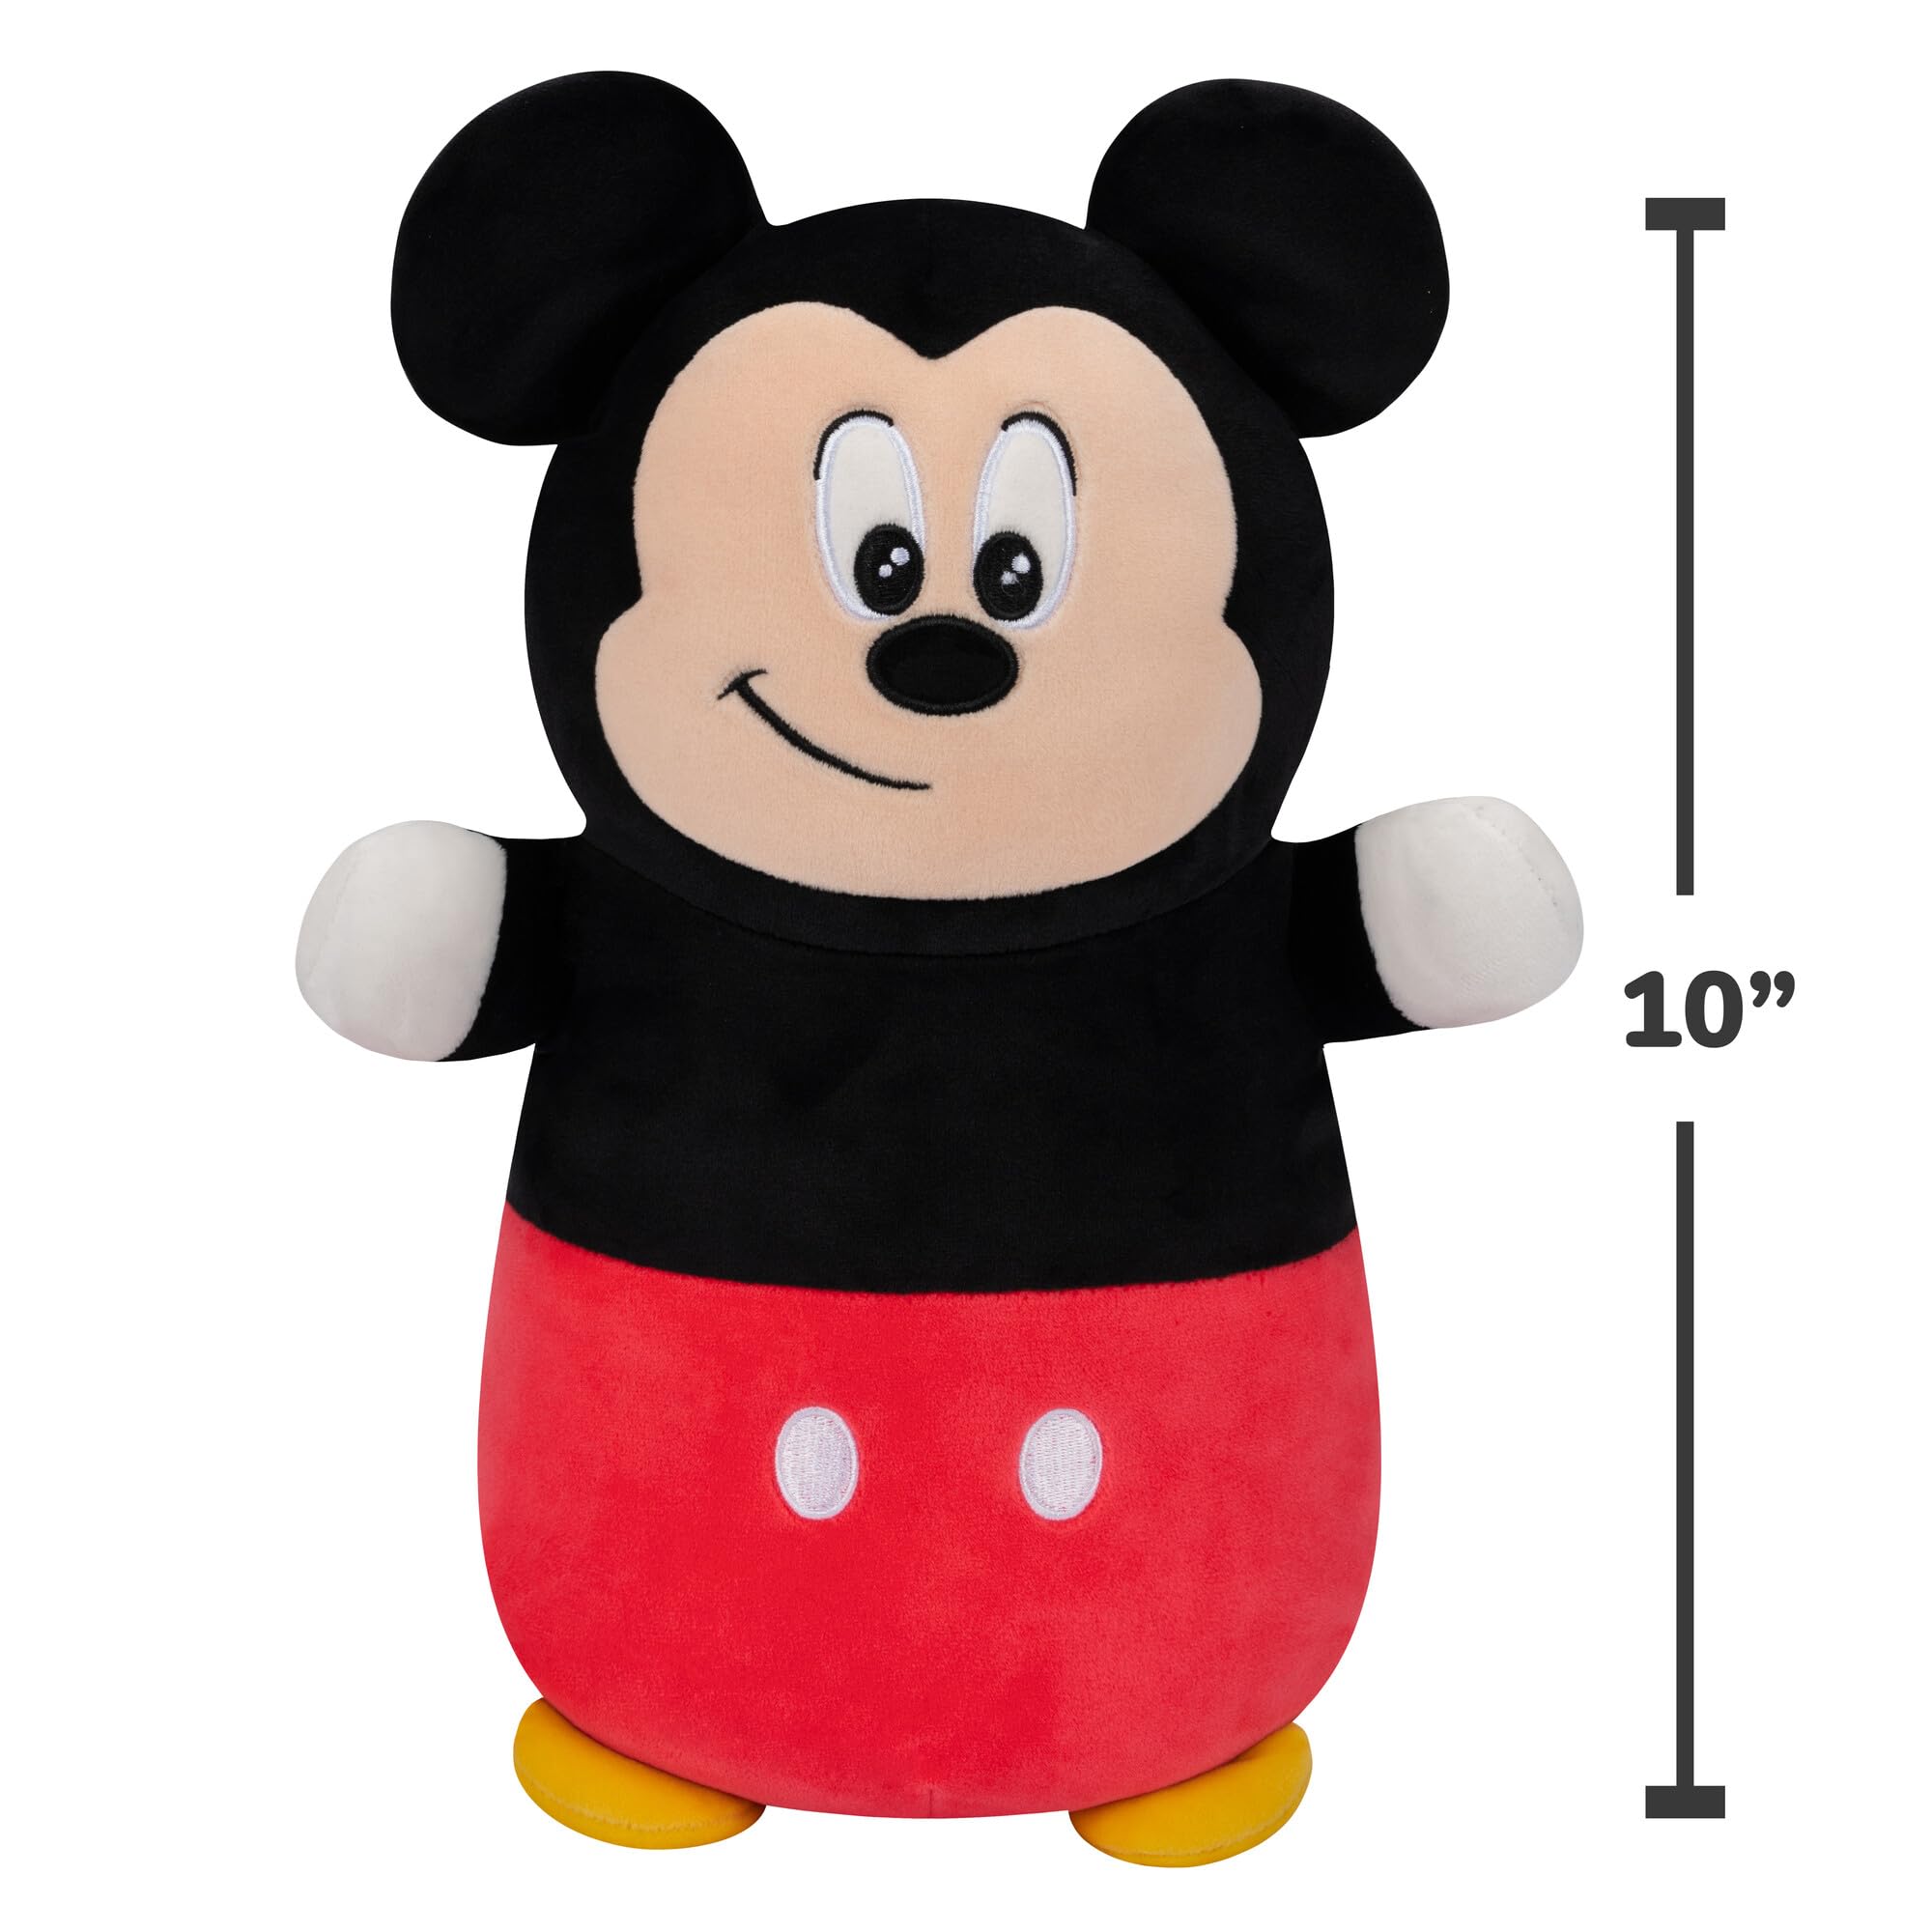 Squishmallows Original Disney 10-Inch Mickey Mouse HugMees - Medium-Sized Ultrasoft Official Jazwares Plush